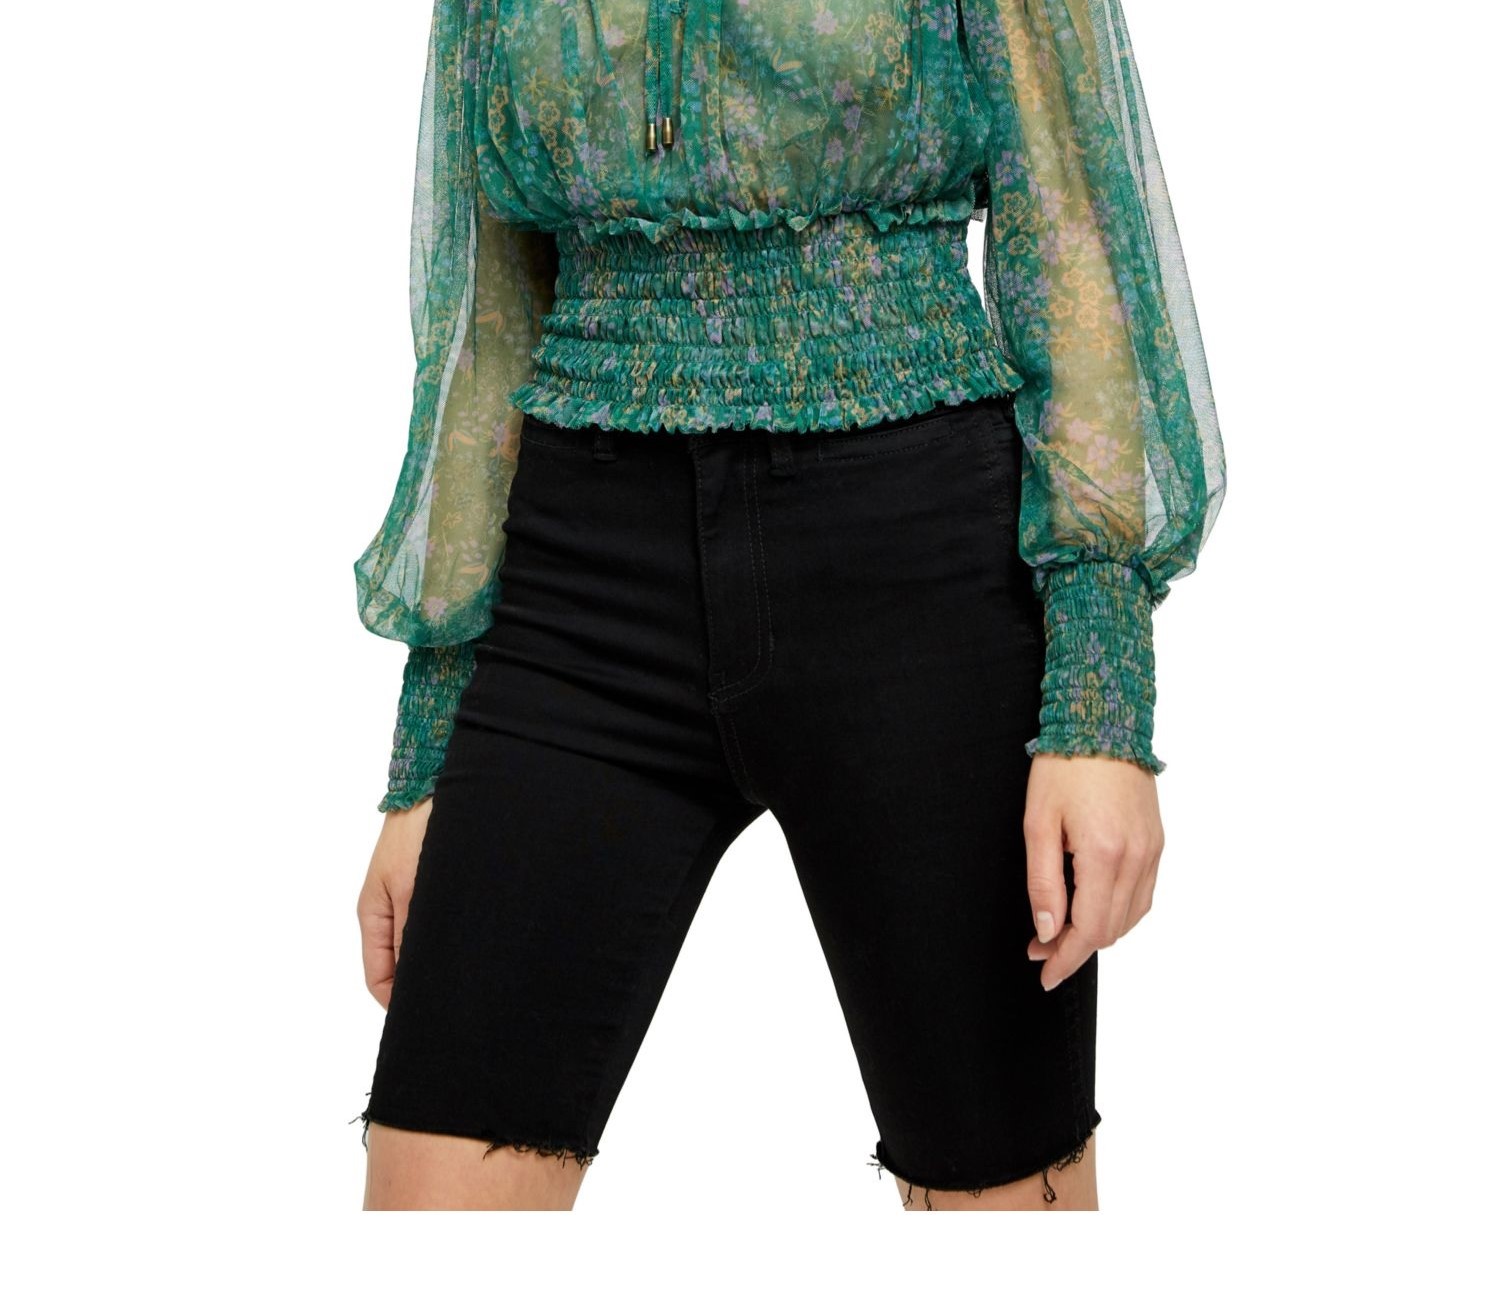 Free People Women's Sheer Smocked Floral Long Sleeve Tie Neck Top Green Size S